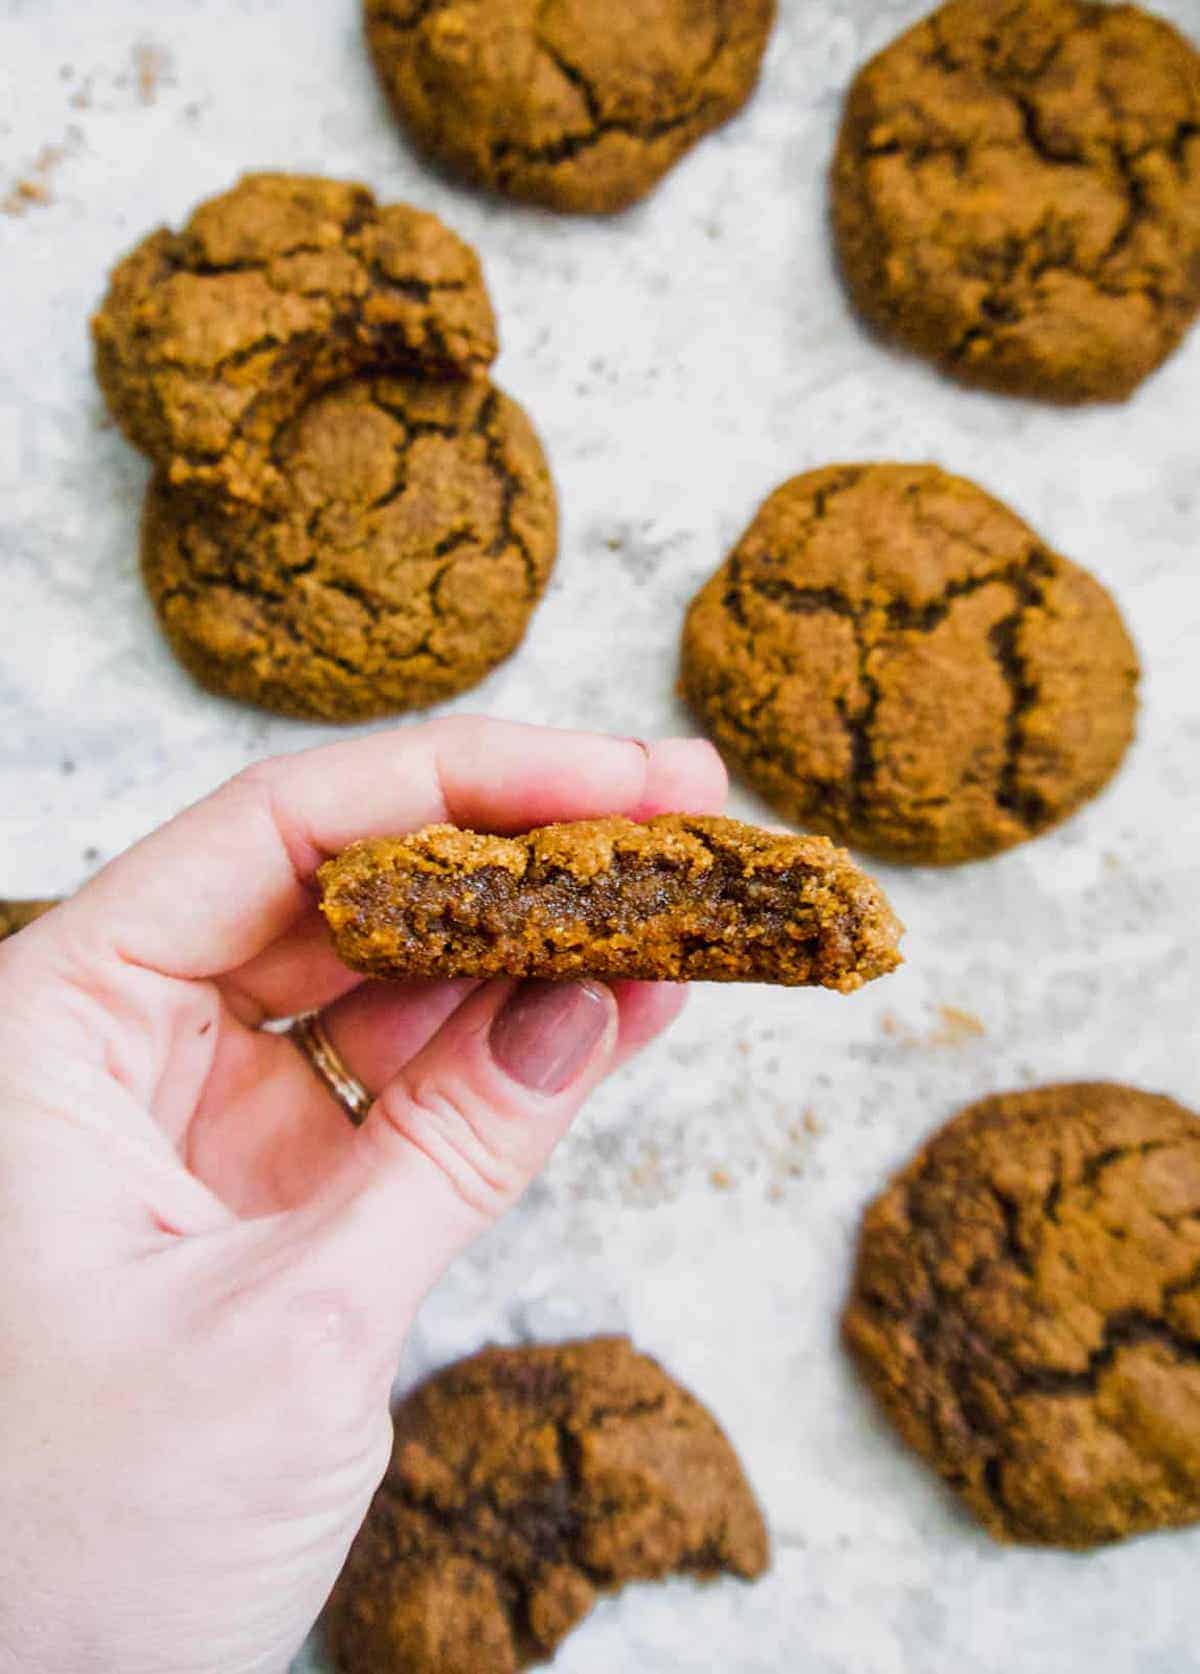 Molasses almond flour cookies with a bite taken out of one.